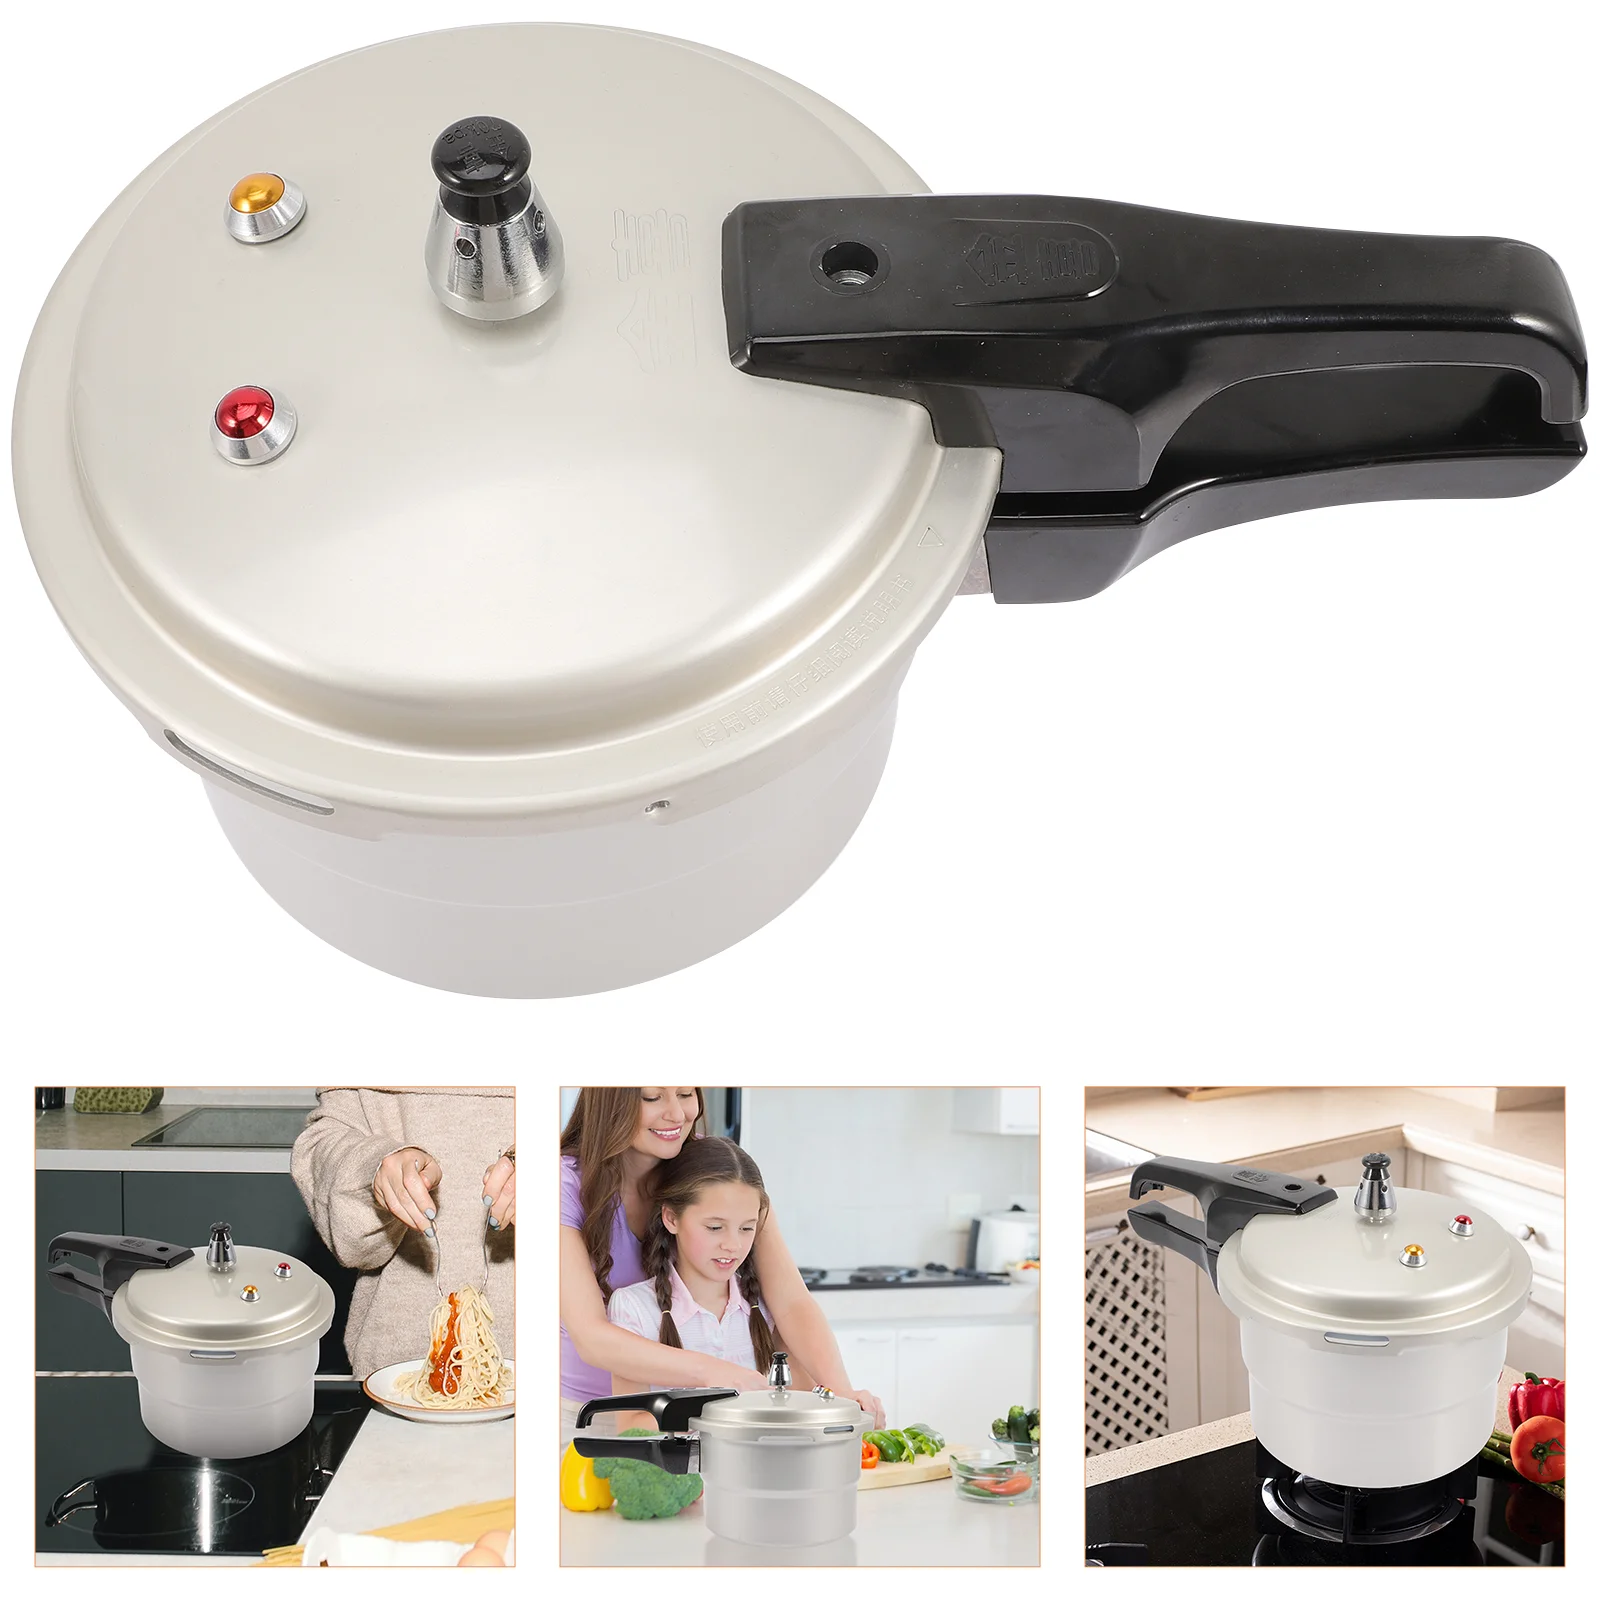 

Pressure Cooker Canning Multipurpose Pot Restaurant Kitchen Supply Universal Gas Stove Efficient Plastic Cooking Electric oven